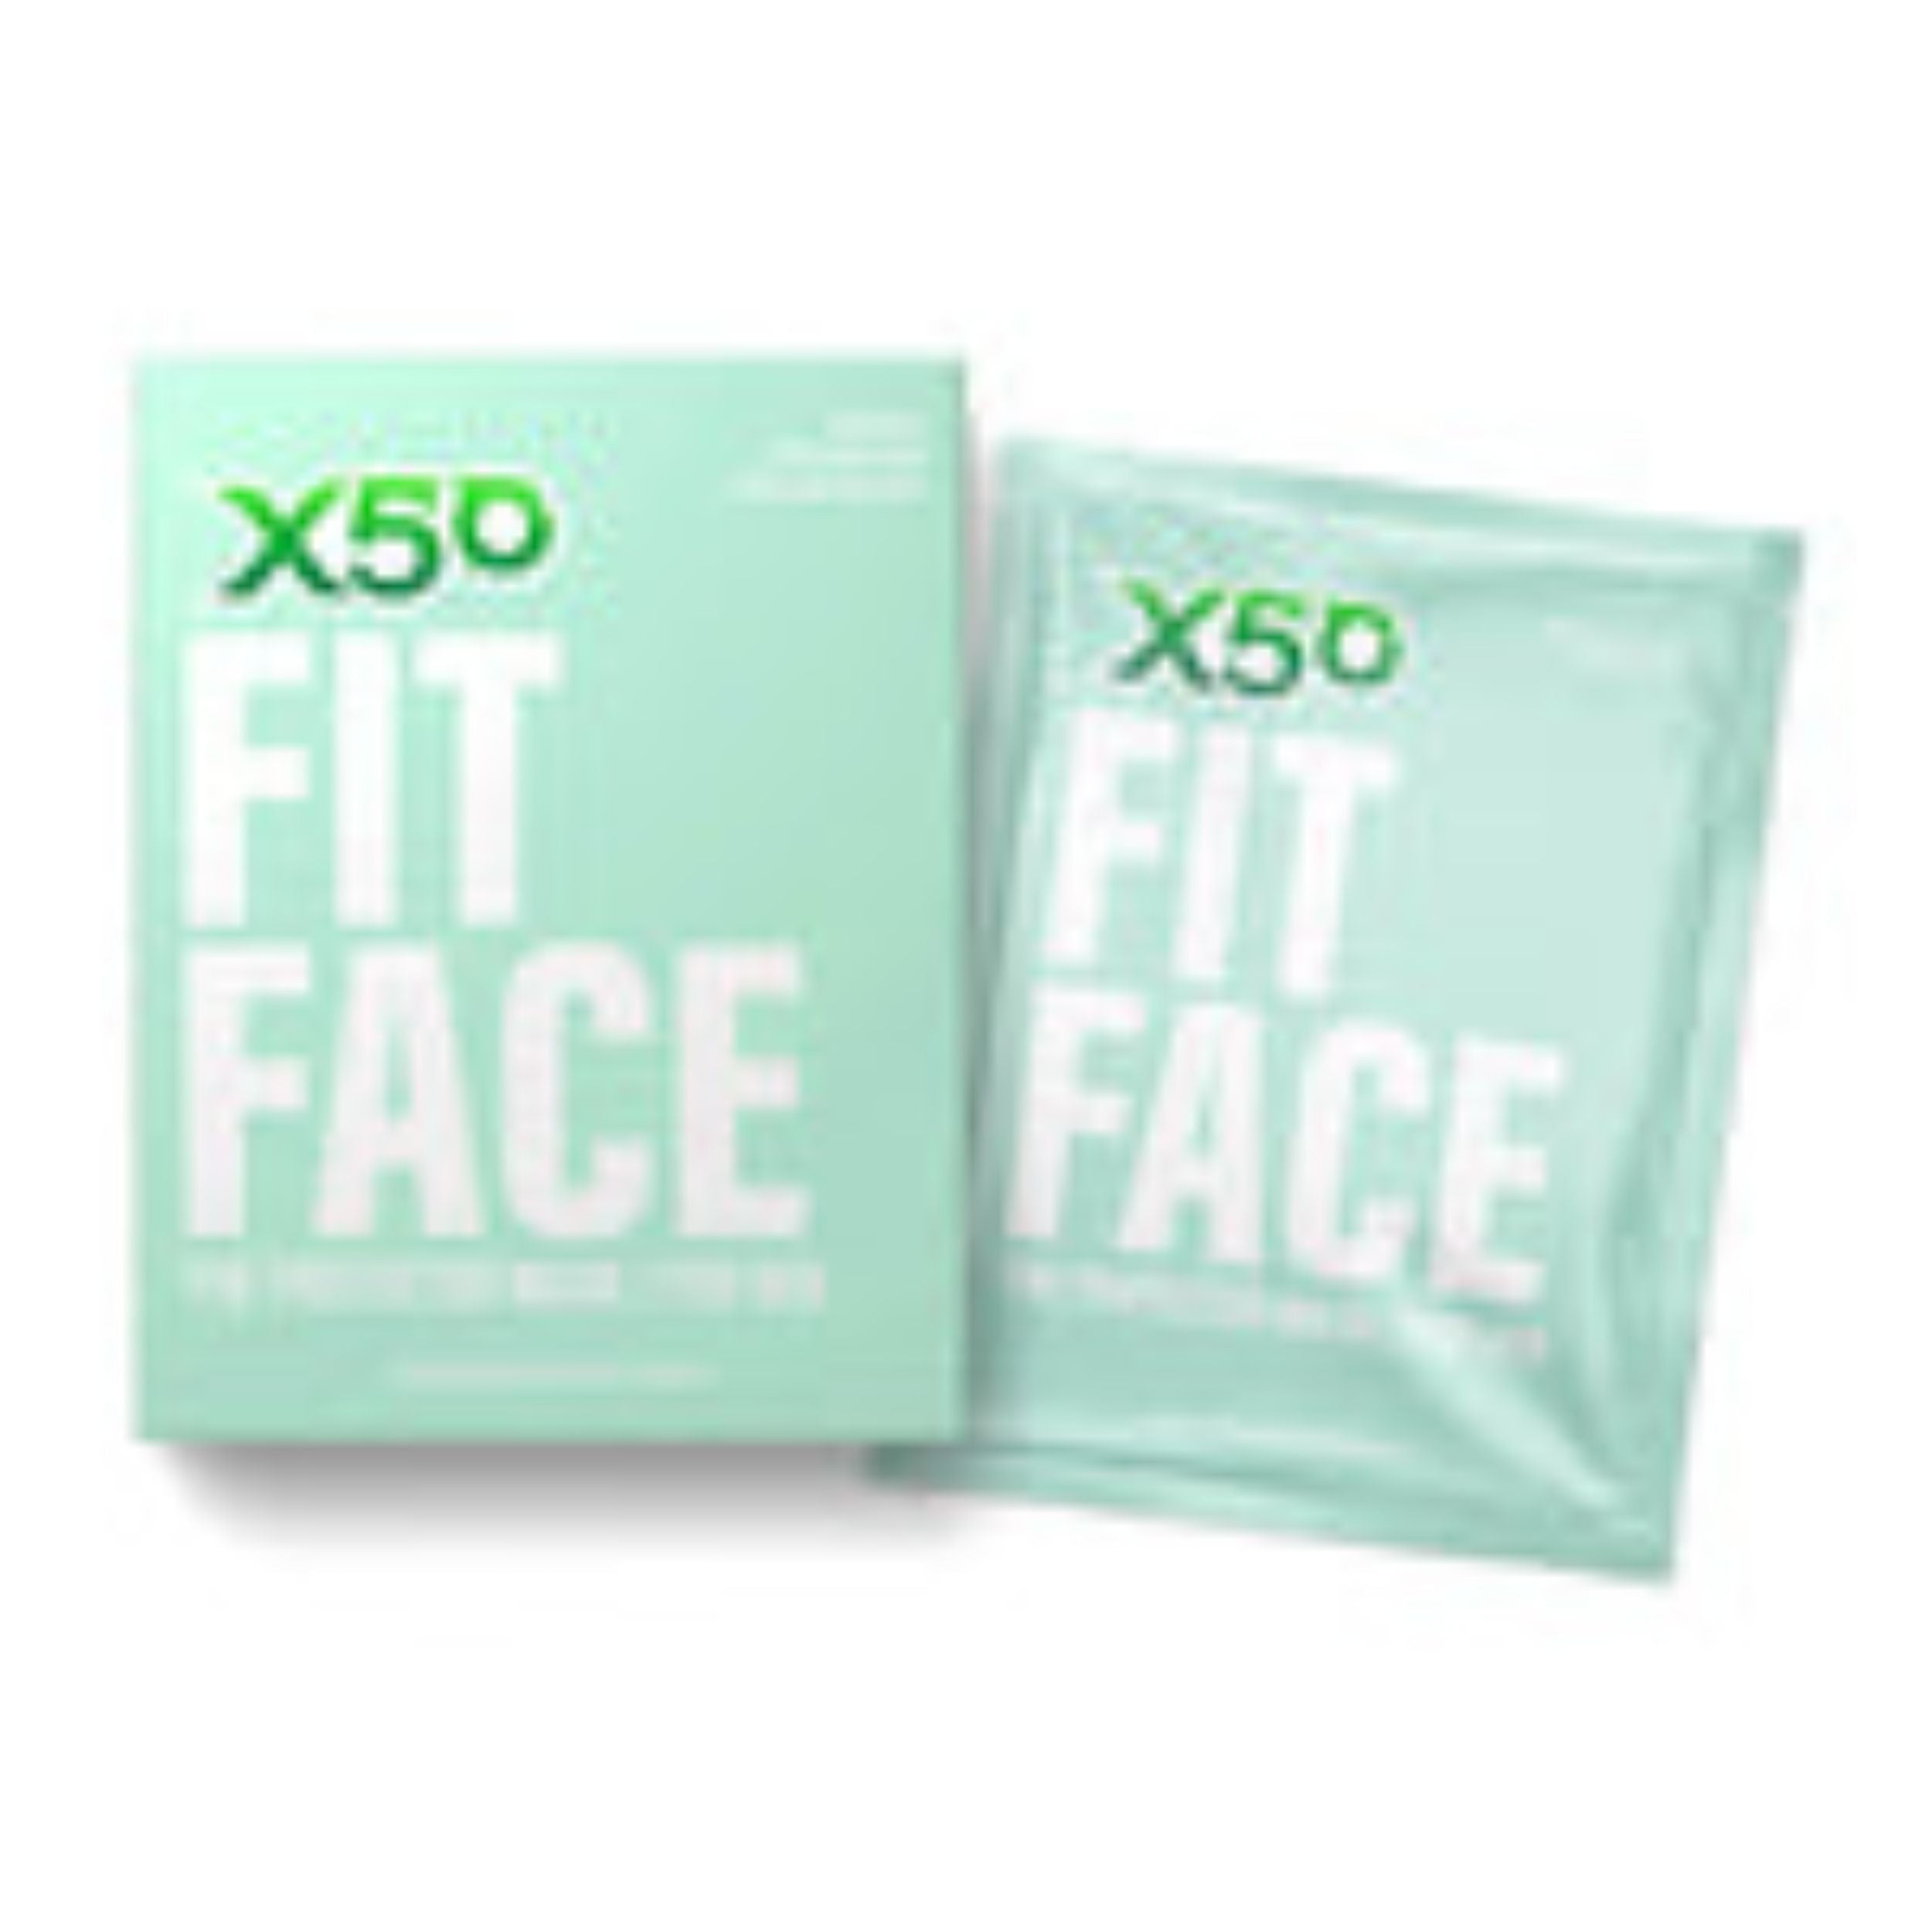 X50 FIT FACE THE PROTECTOR MASK